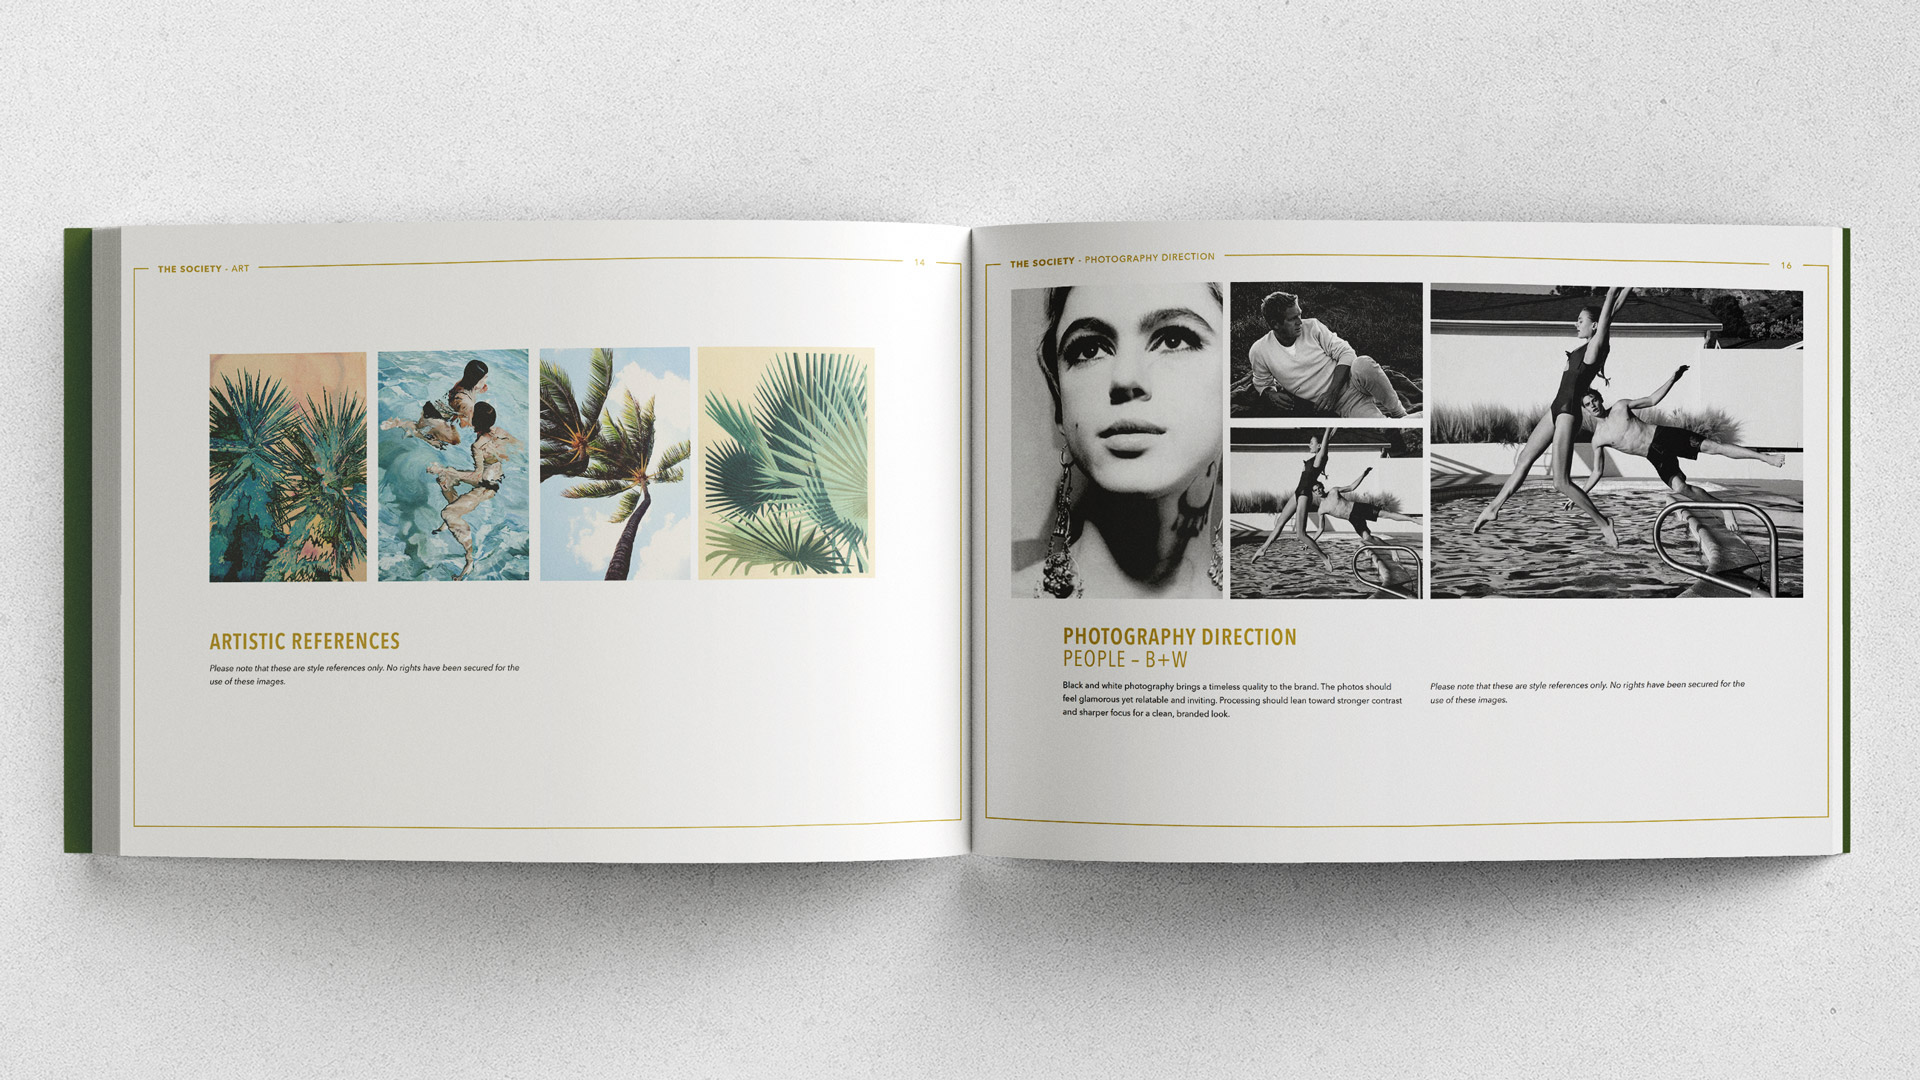 The Society apartments branding brand book created by Incubate Design for Holland Residential